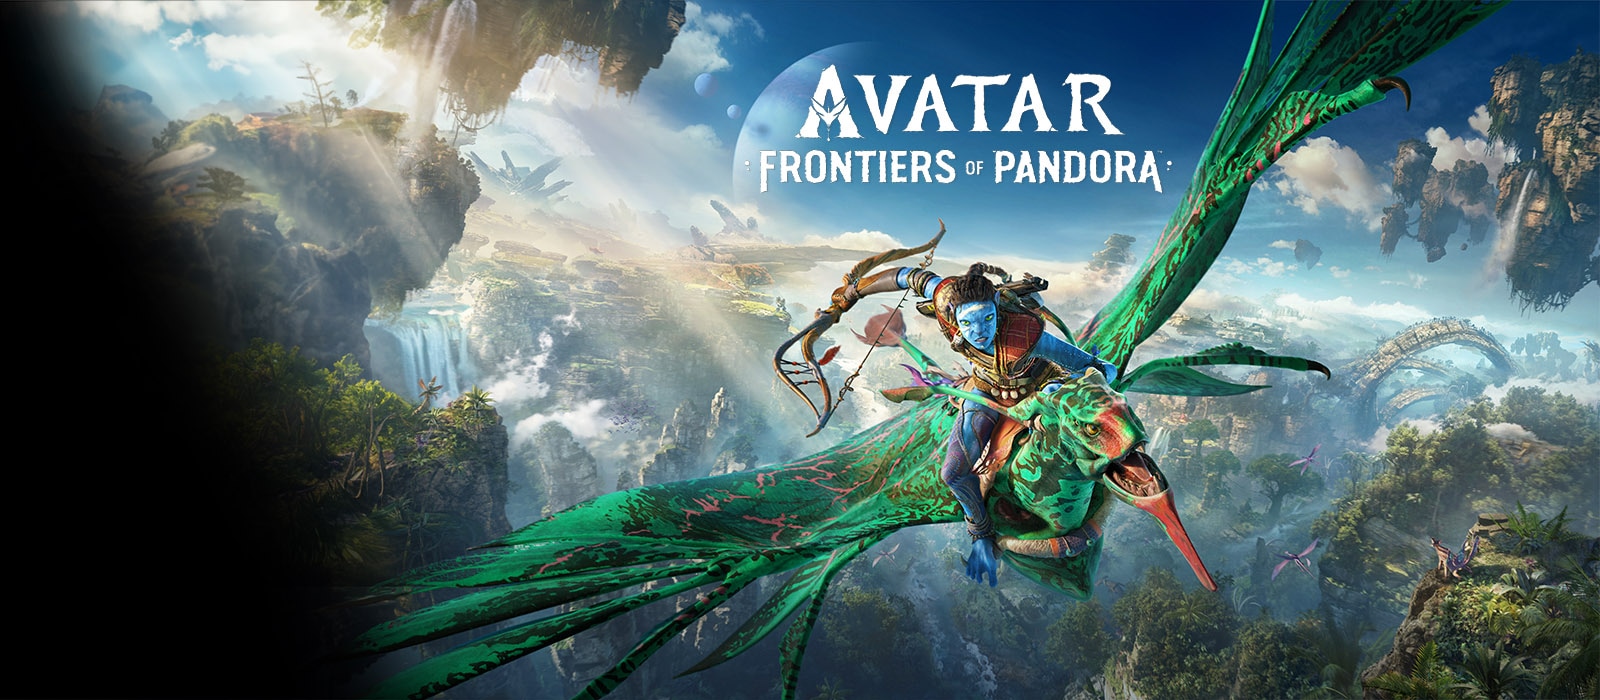 Avatar: Frontiers of Pandora splash image with a flying creature complete with rider, flying through a lush landscape.